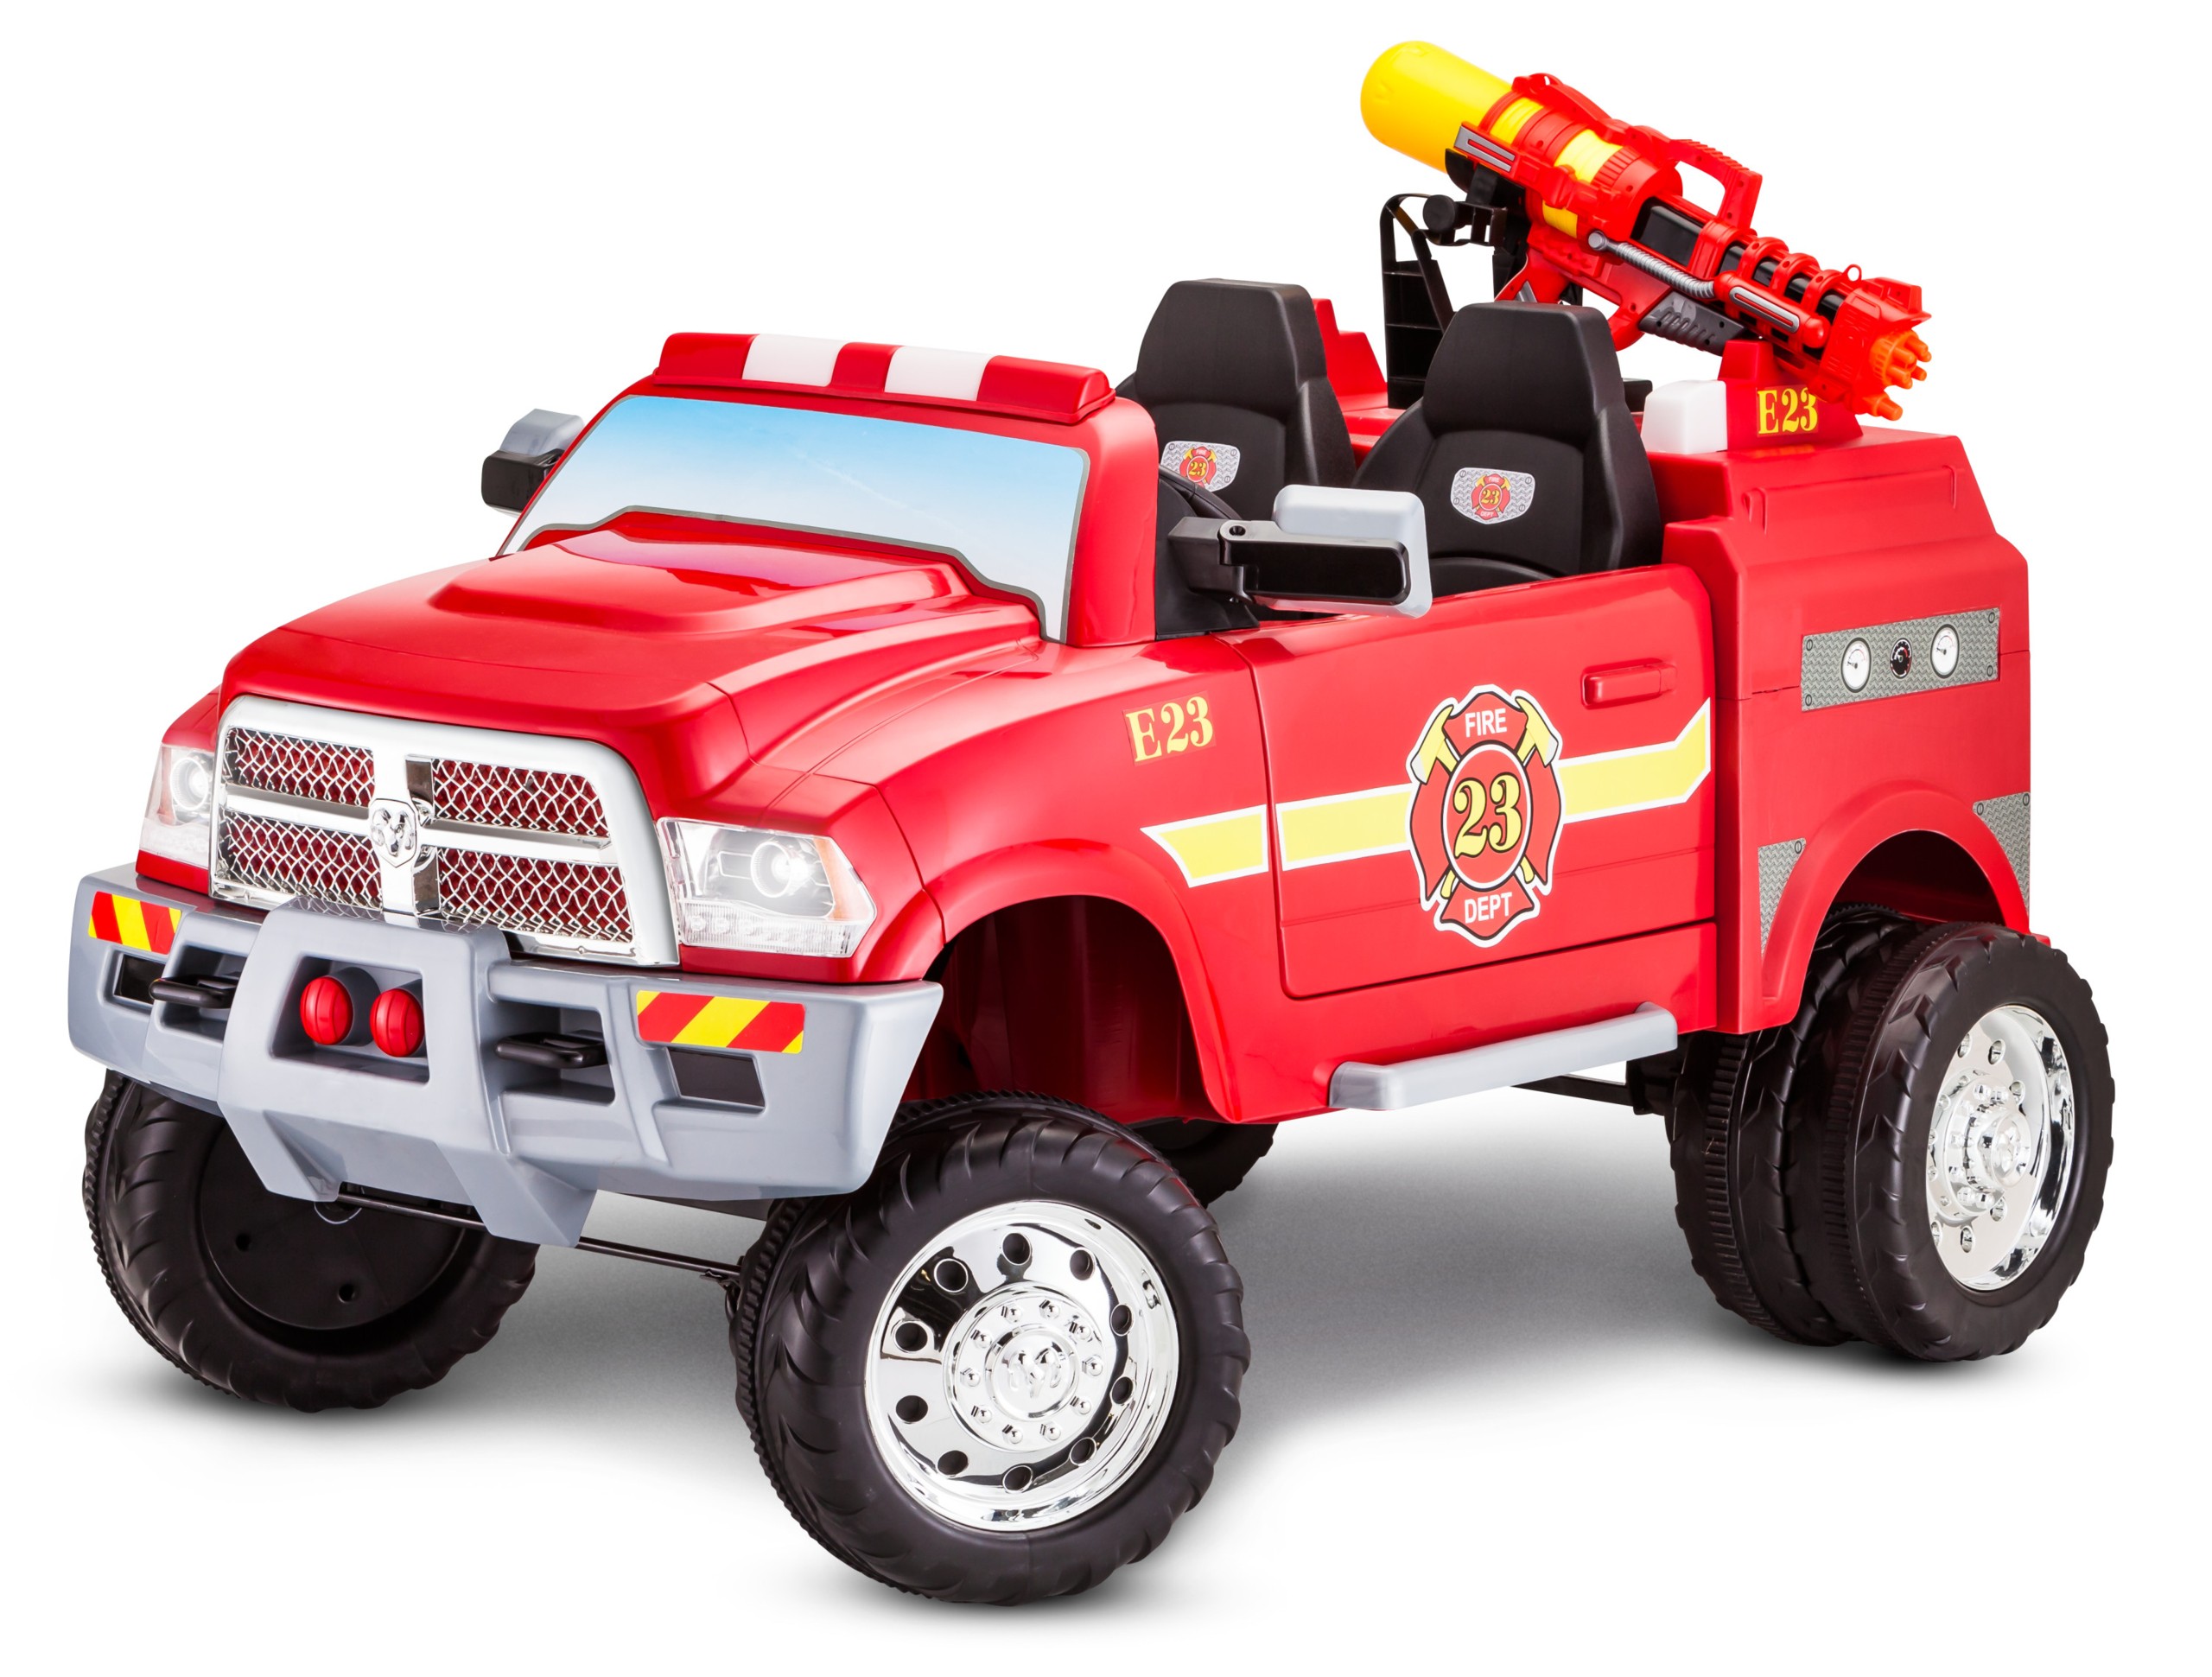 Ram 3500 fire truck ride on toy by kid trax